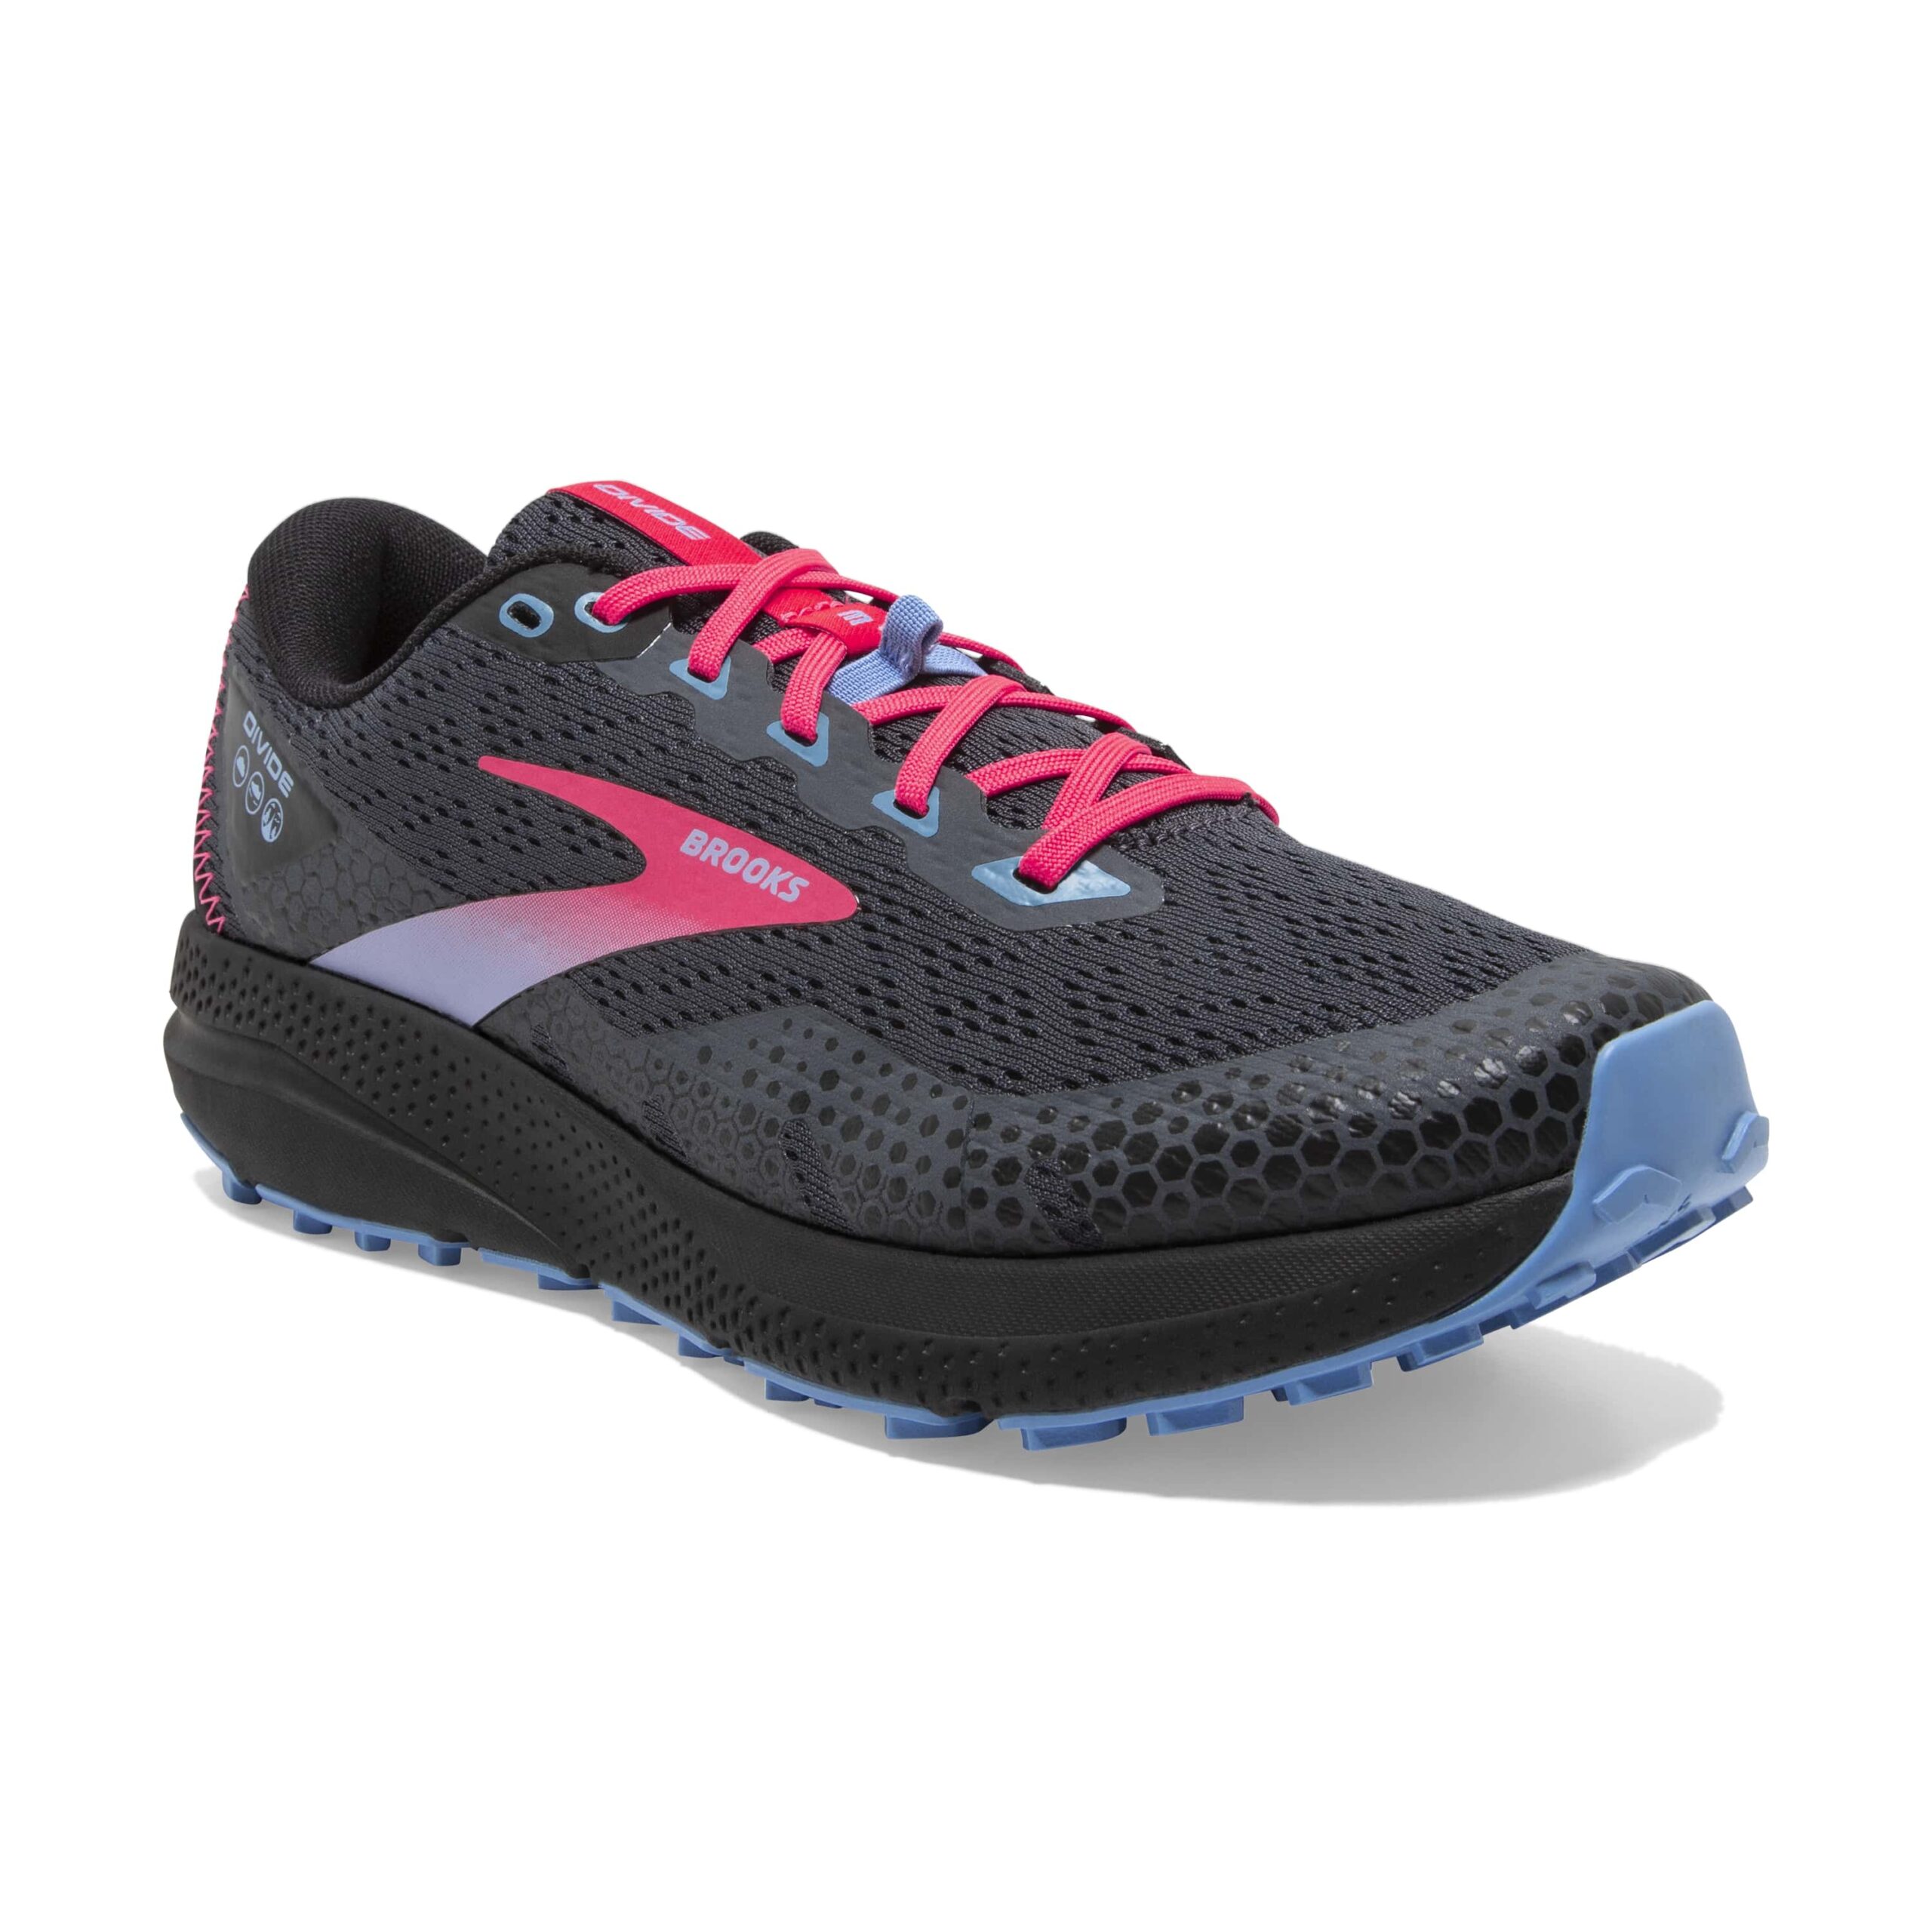 Women's Brooks Divide 3 - Ebony/Black/Diva Pink | Stan's Fit For Your Feet